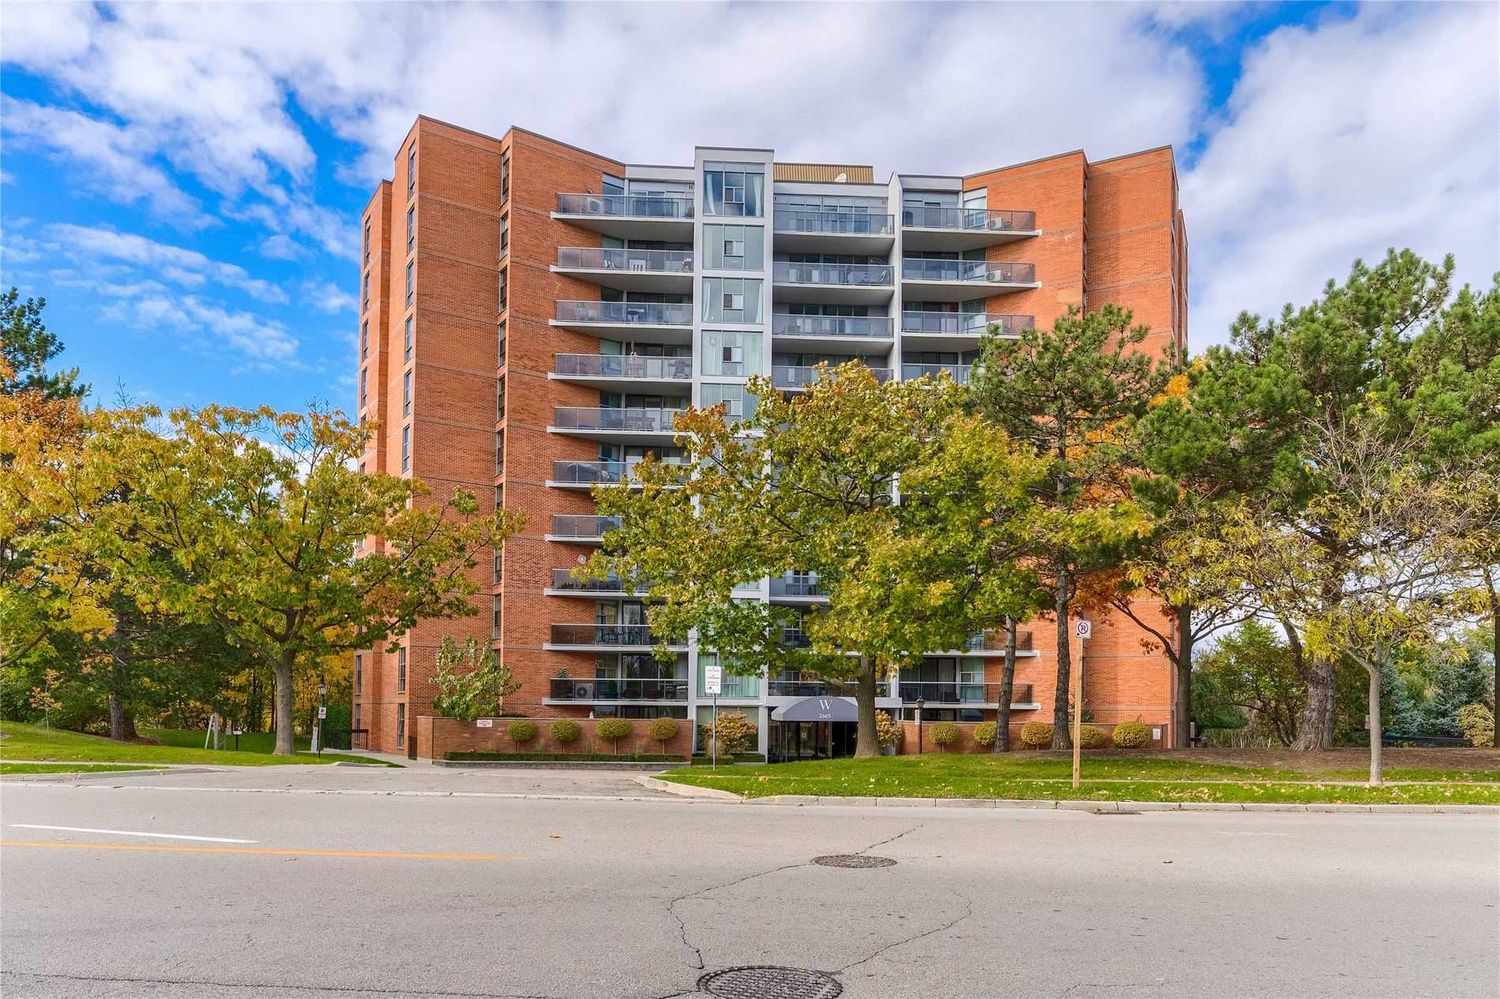 2665 Windwood Drive. Windwood Green Condos is located in  Mississauga, Toronto - image #2 of 3